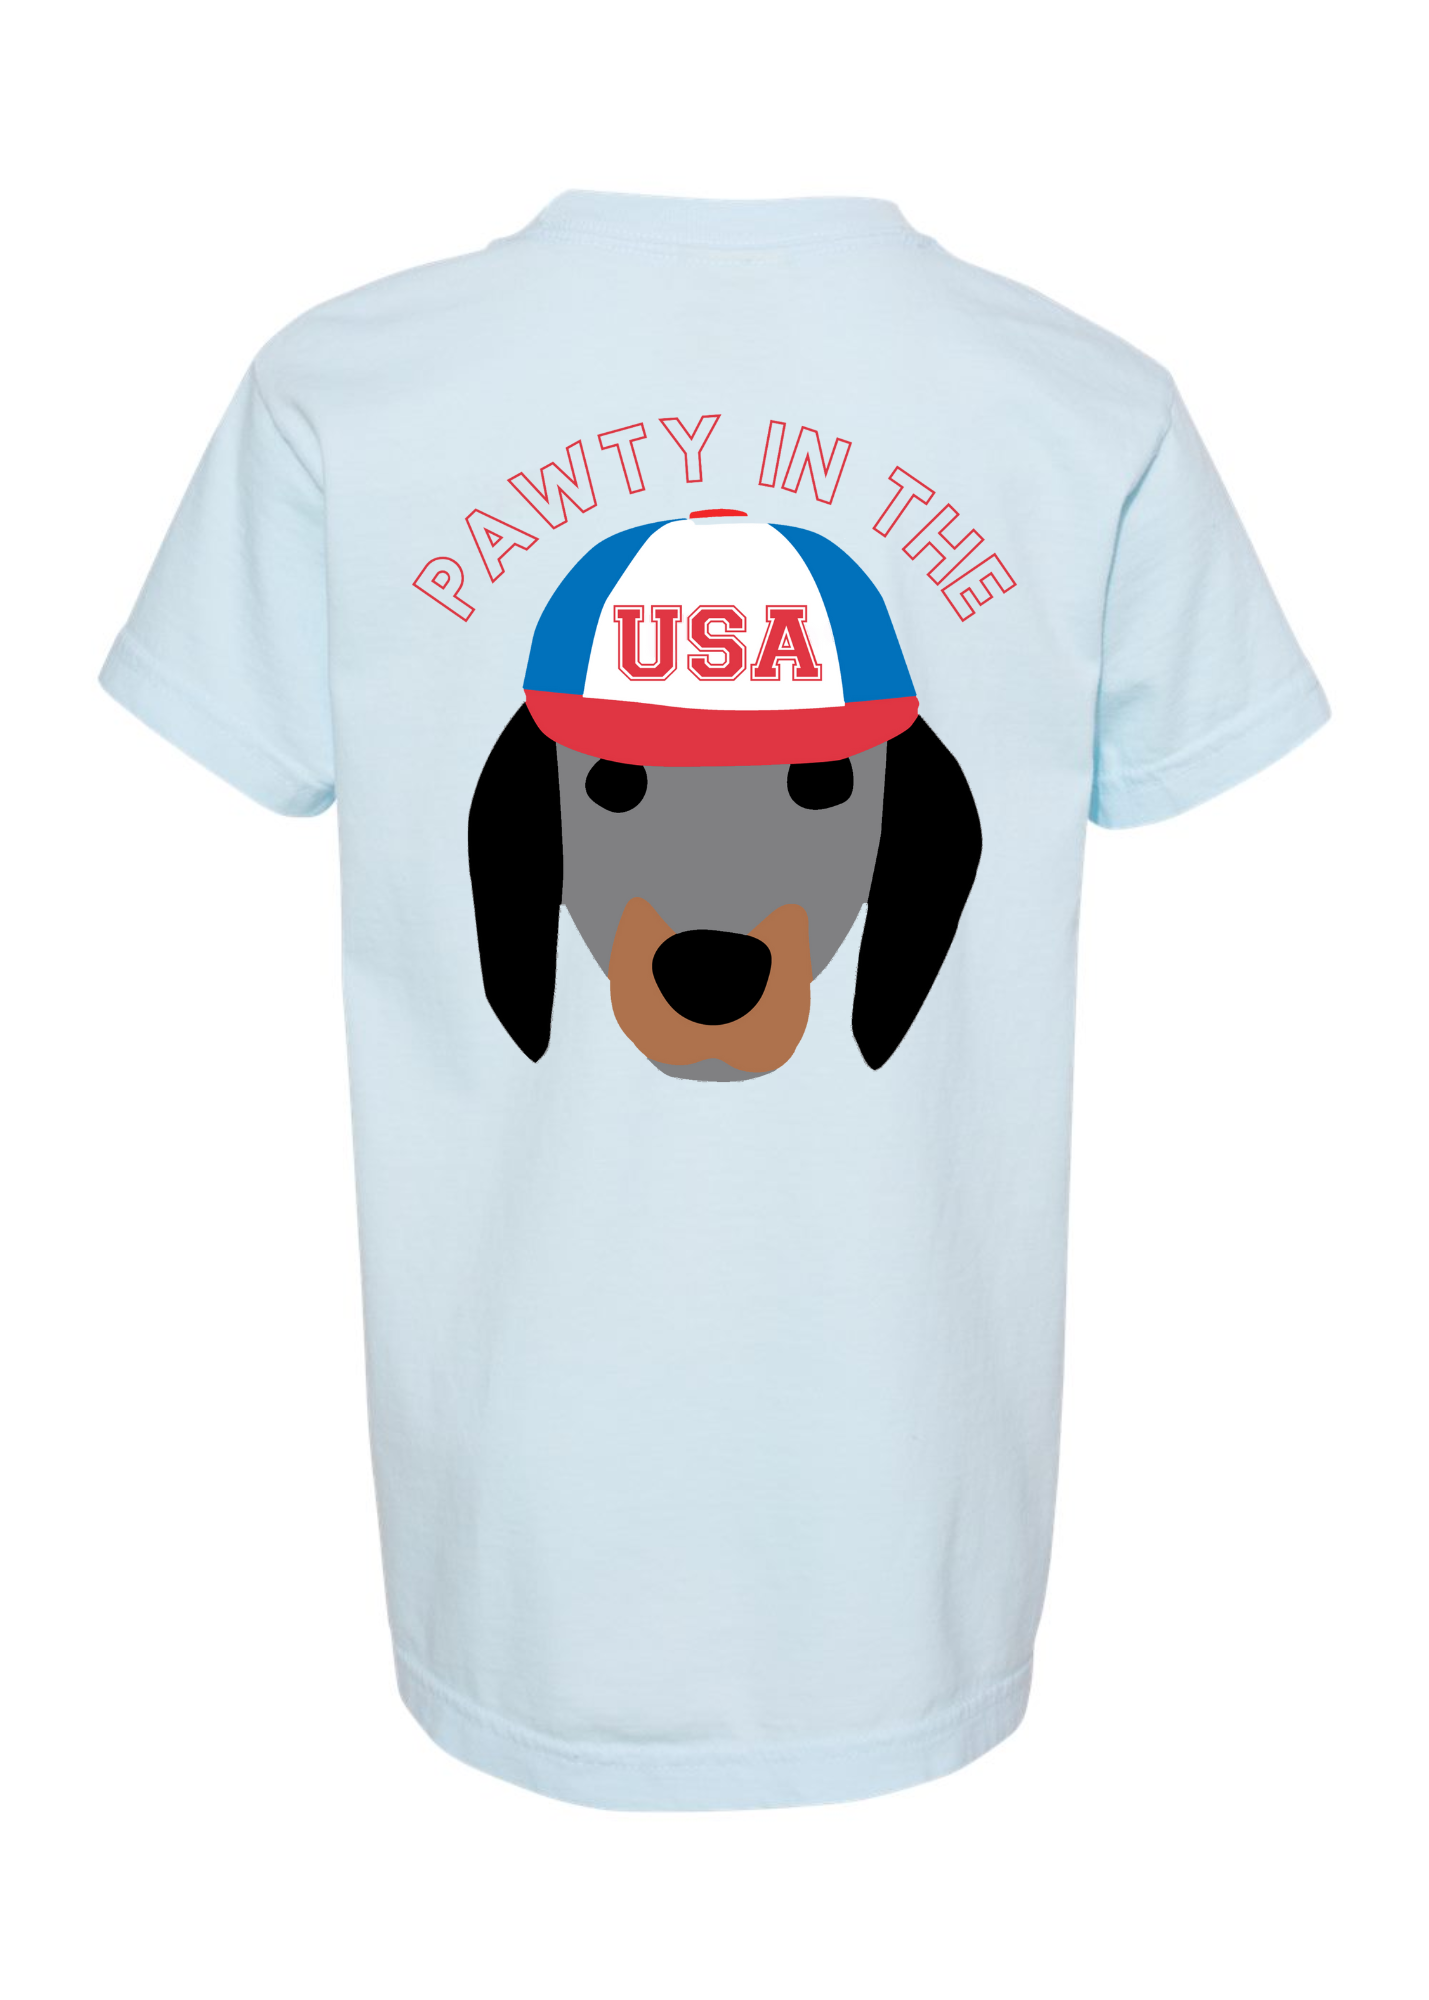 Pawty in the USA | Kids Tee | RTS-Kids Tees-Sister Shirts-Sister Shirts, Cute & Custom Tees for Mama & Littles in Trussville, Alabama.